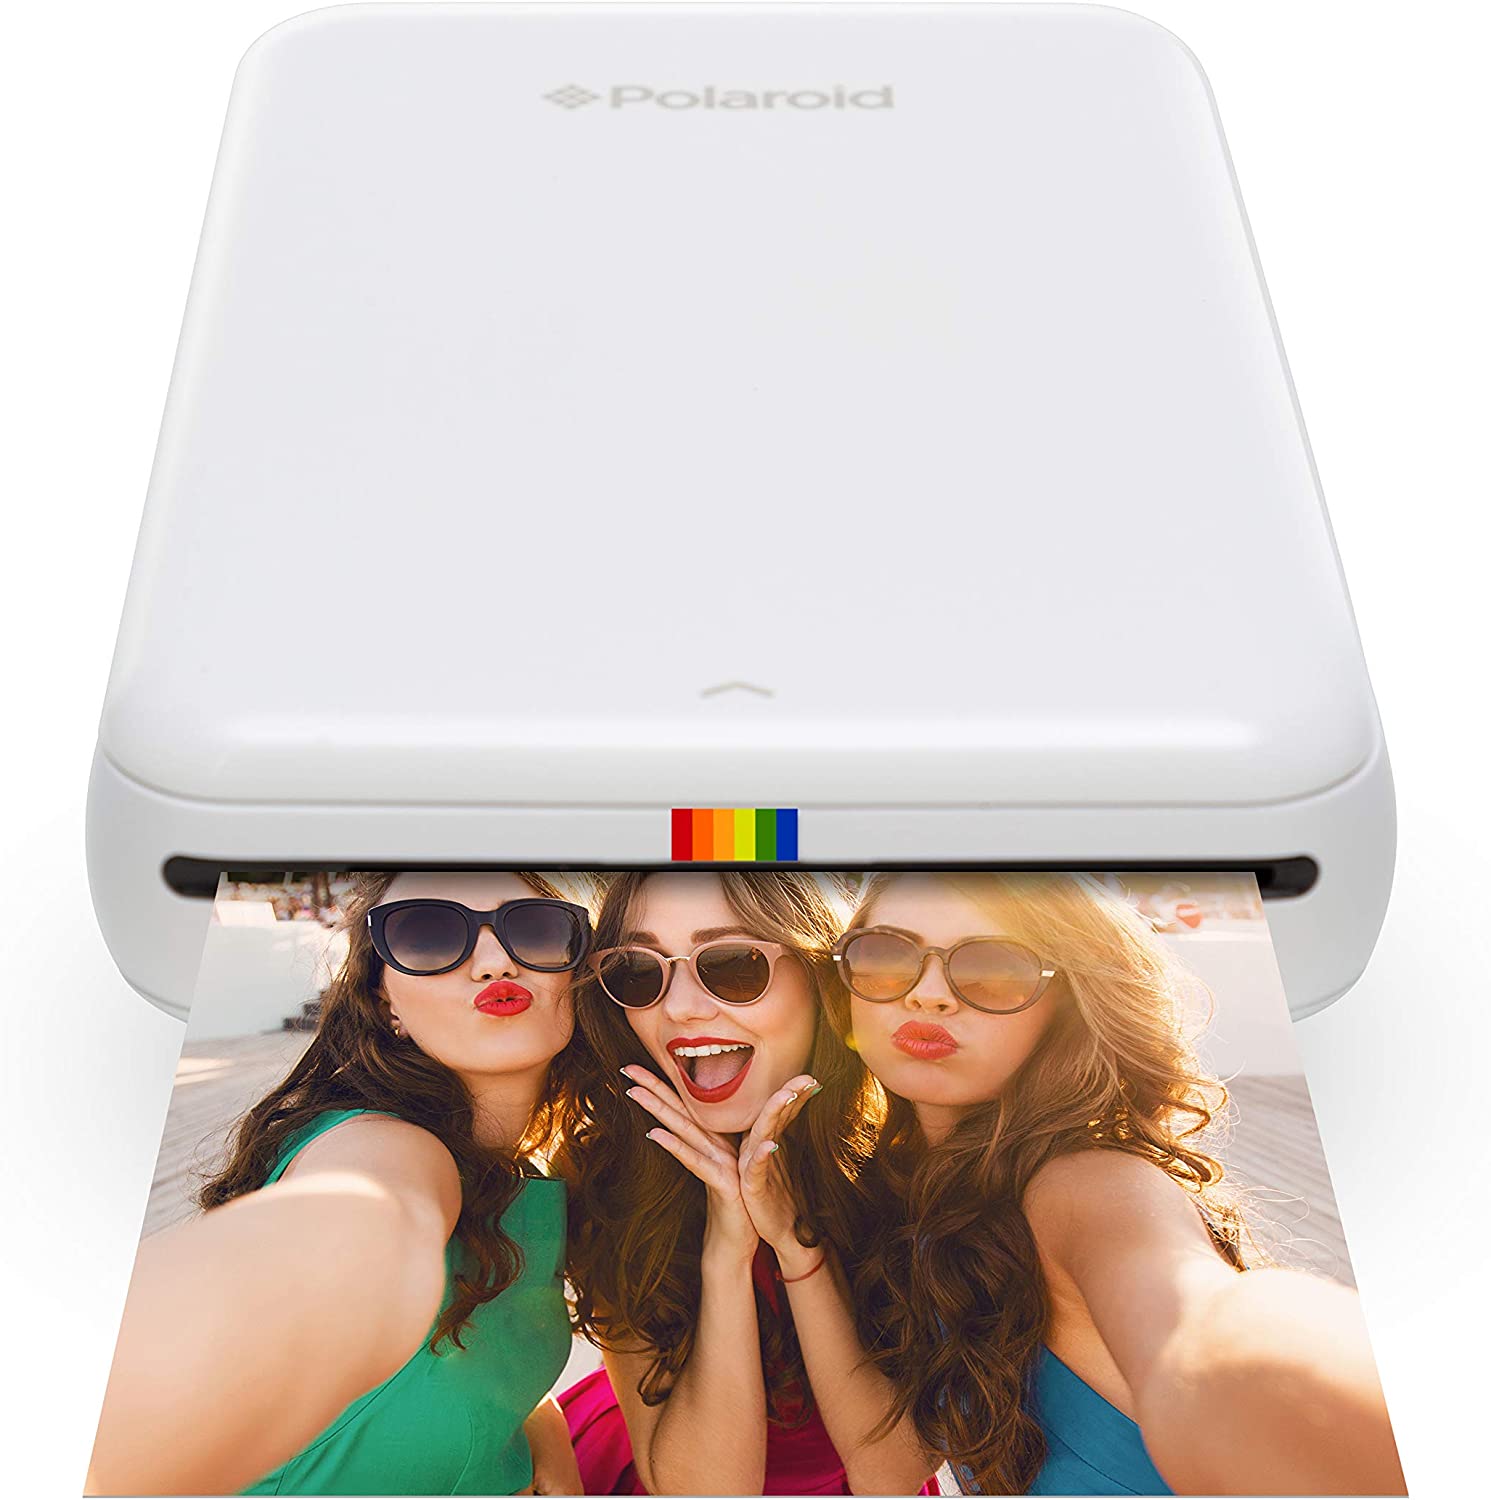 Polaroid's portable ink-free printer lets you instantly print your favorite photos without the hassles of standard printers